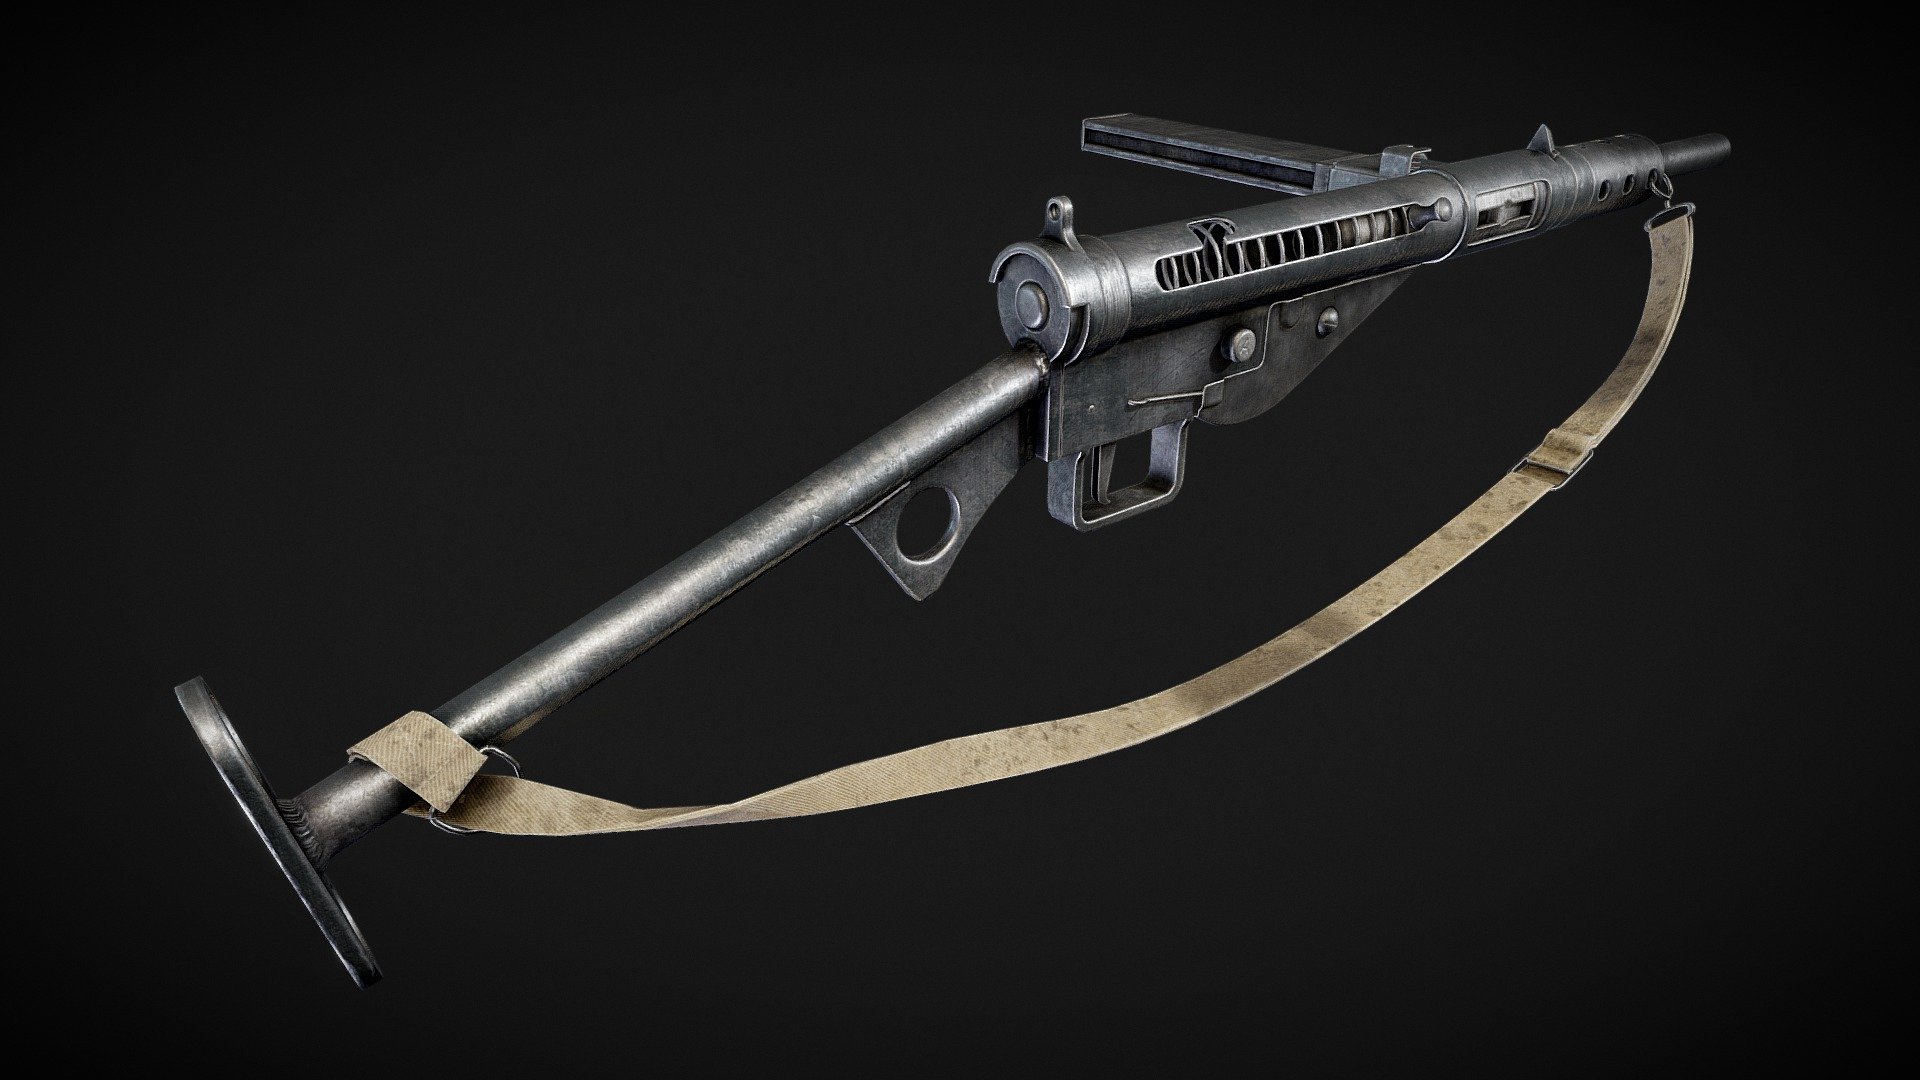 The STEN is a family of British submachine guns chambered in 9×19mm which were used extensively by British and Commonwealth forces throughout World War II and the Korean War.

This model is made up of 8,606 polygons and includes the gun, an ammo magazine, a 9x19mm bullet and a carrying strap. The model uses two texture sets, one for the gun and one for the strap and I've included textures at 4096 x 4096, 2048 x 2048 and 1024 x 1024 resolutions in the additional files 3d model